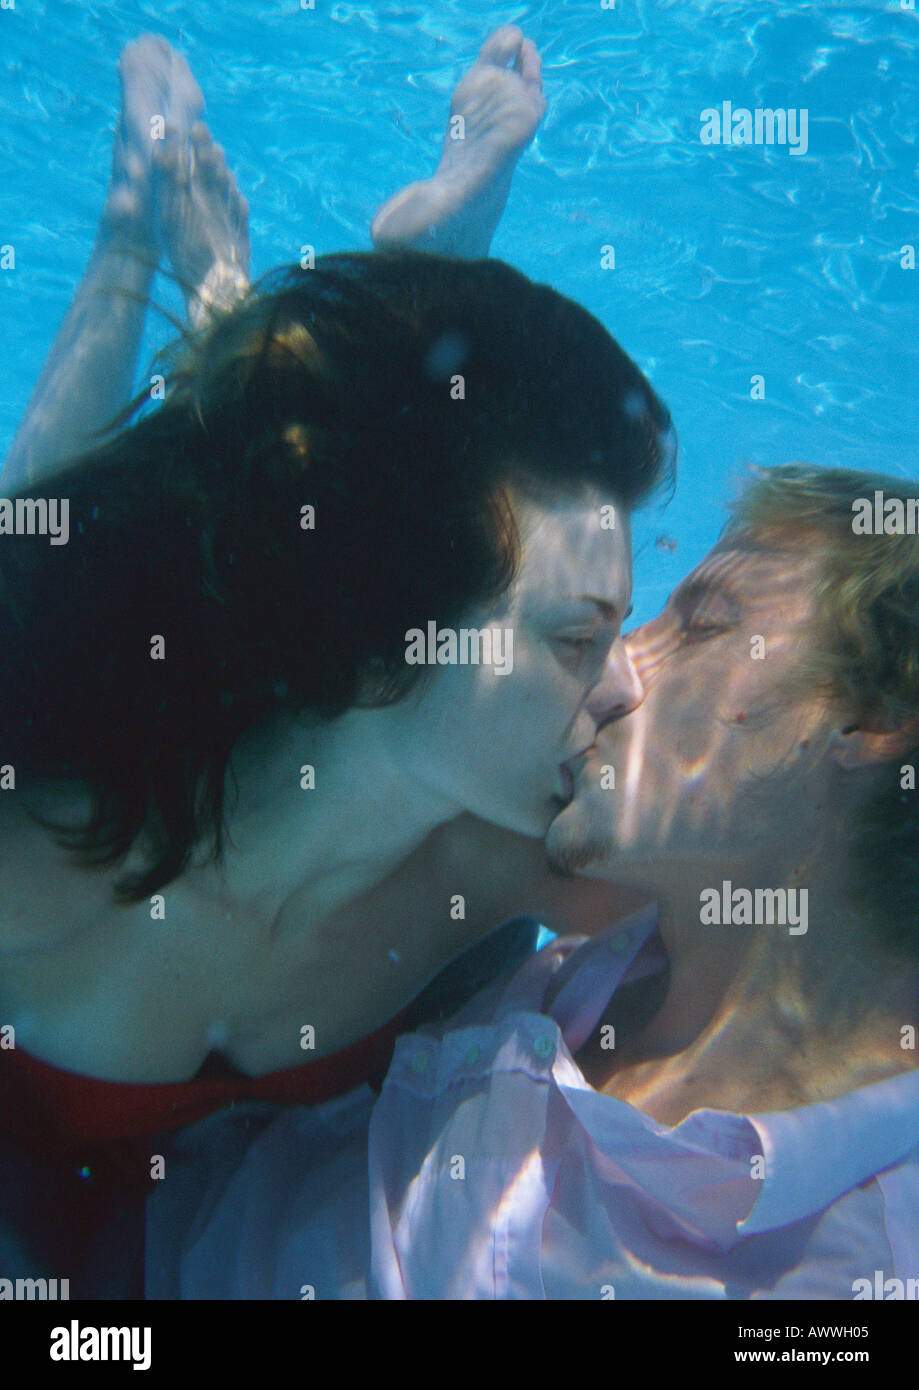 Couple kissing underwater Banque D'Images